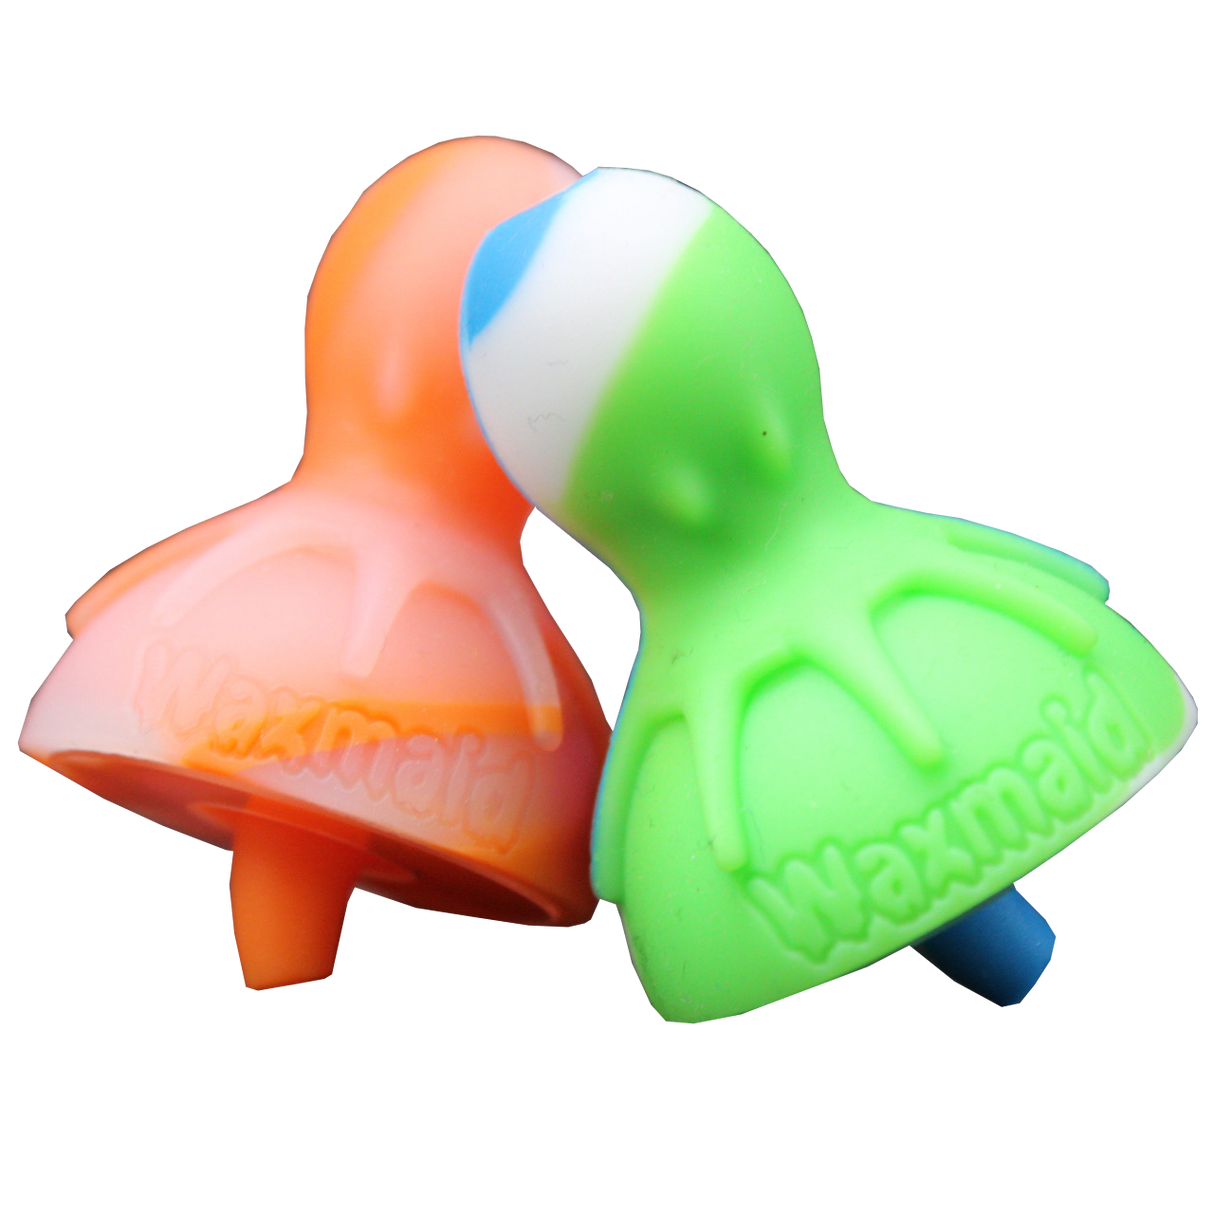 Waxmaid Silicone Carb Cap Packs of 2